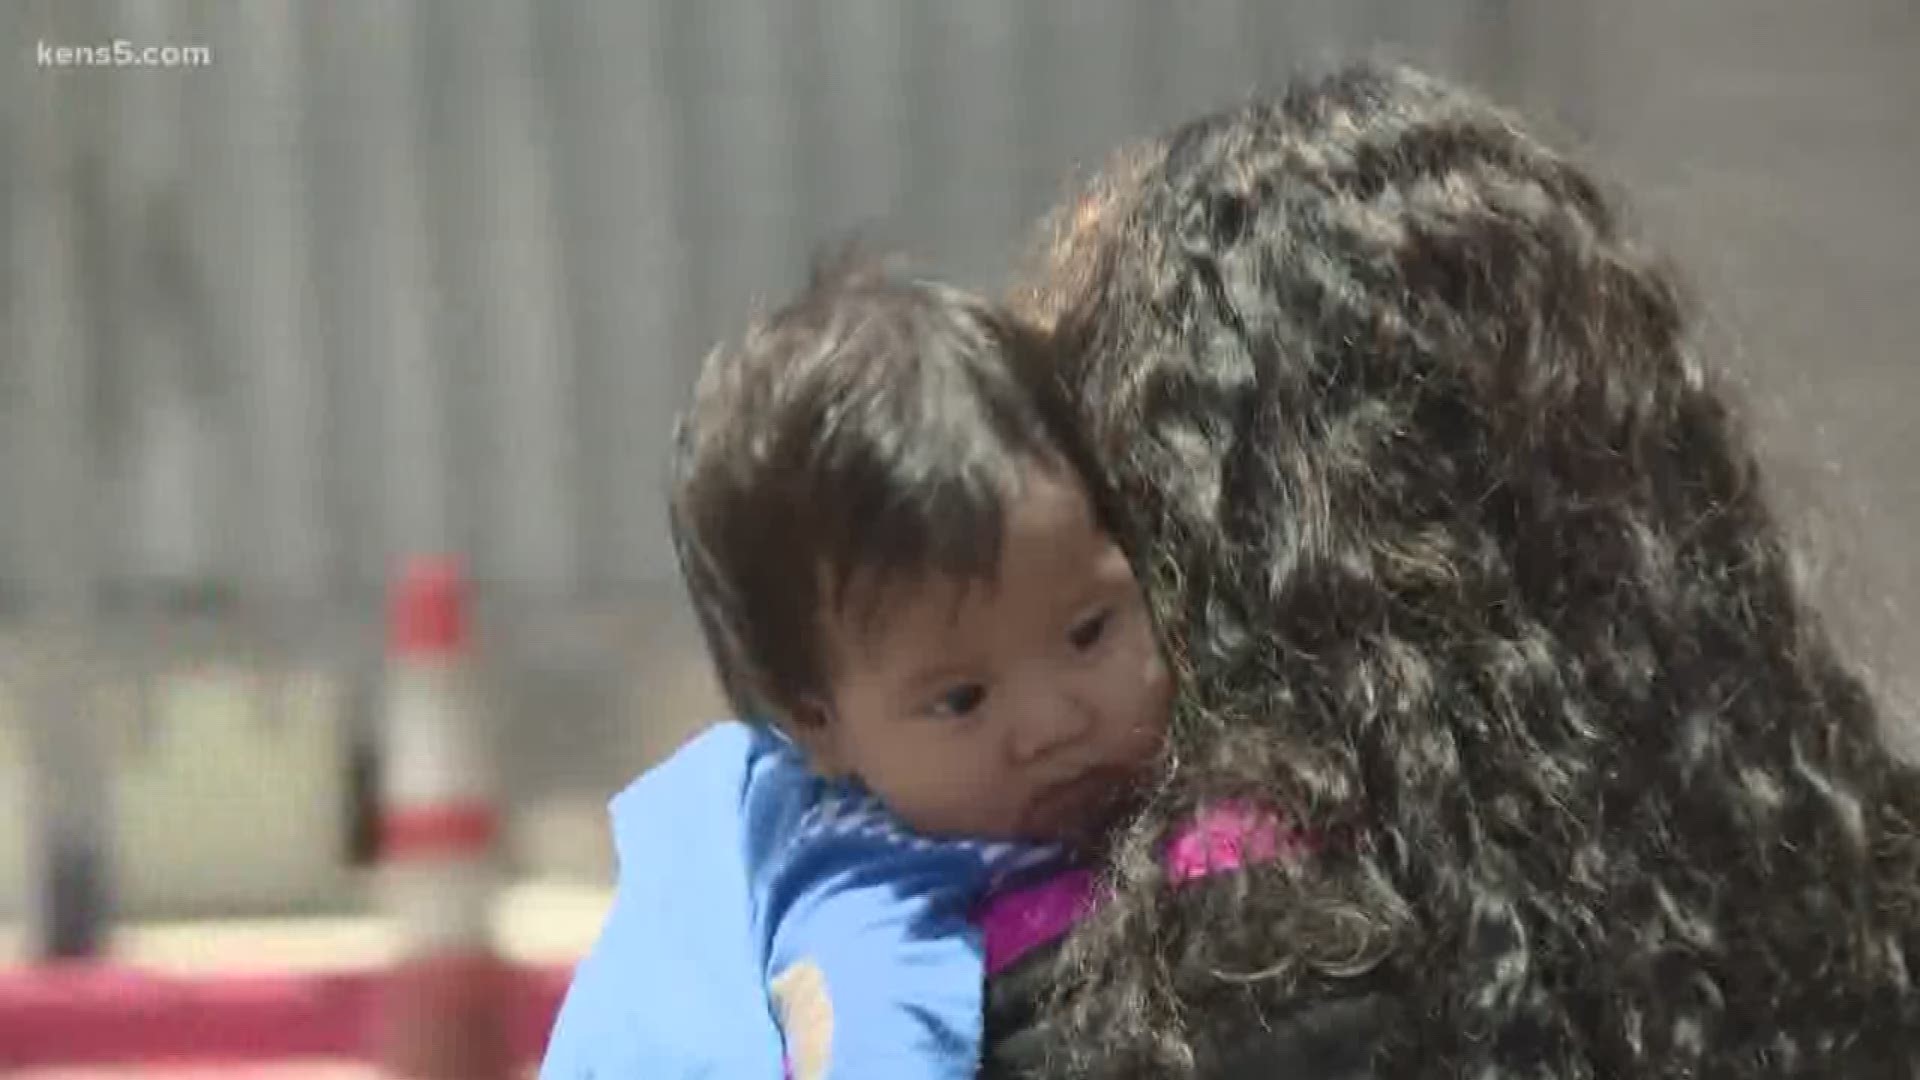 A federal judge also rejected the Trump administration's request to detain immigrant families for long term. It's a decision that may lead now to more immigrants being released. Eyewitness News border reporter Oscar Margain explains.